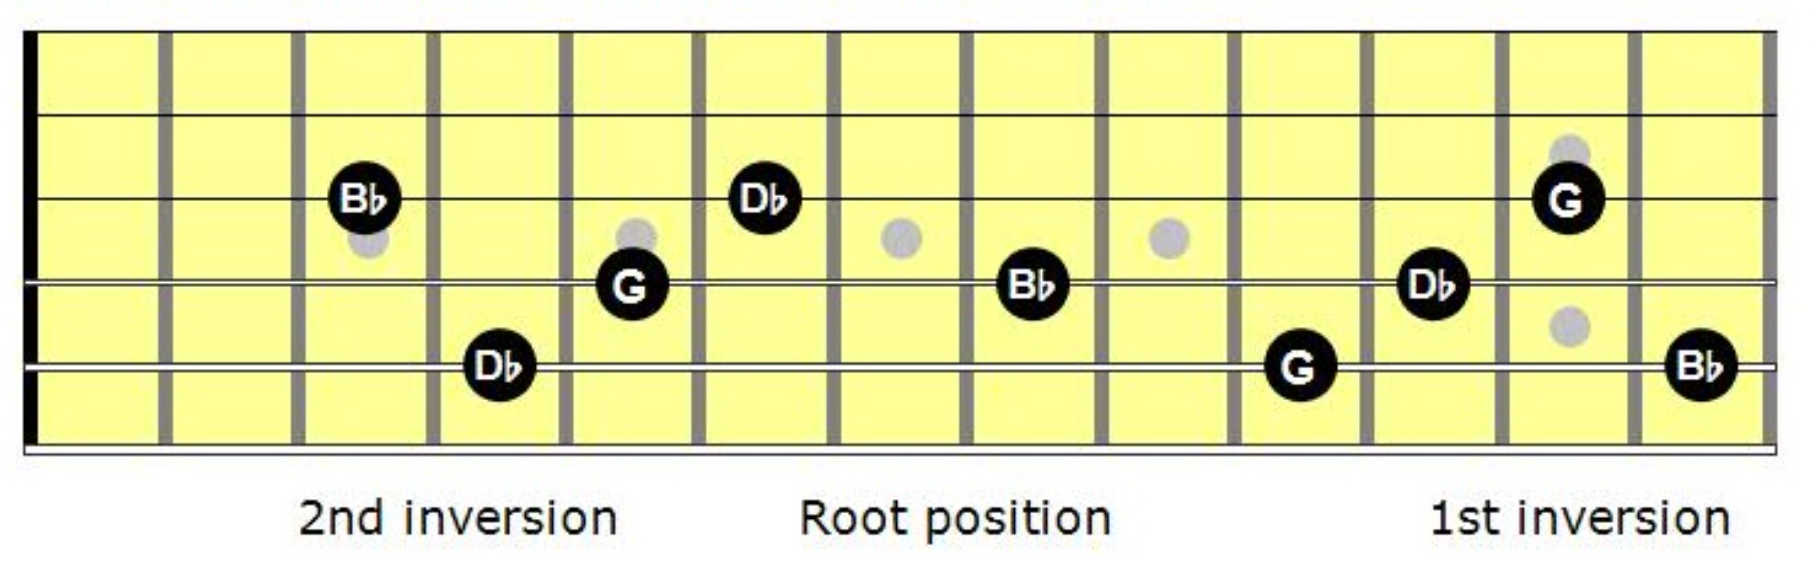 Diminished Chord Shapes on the A, D, and G Strings)